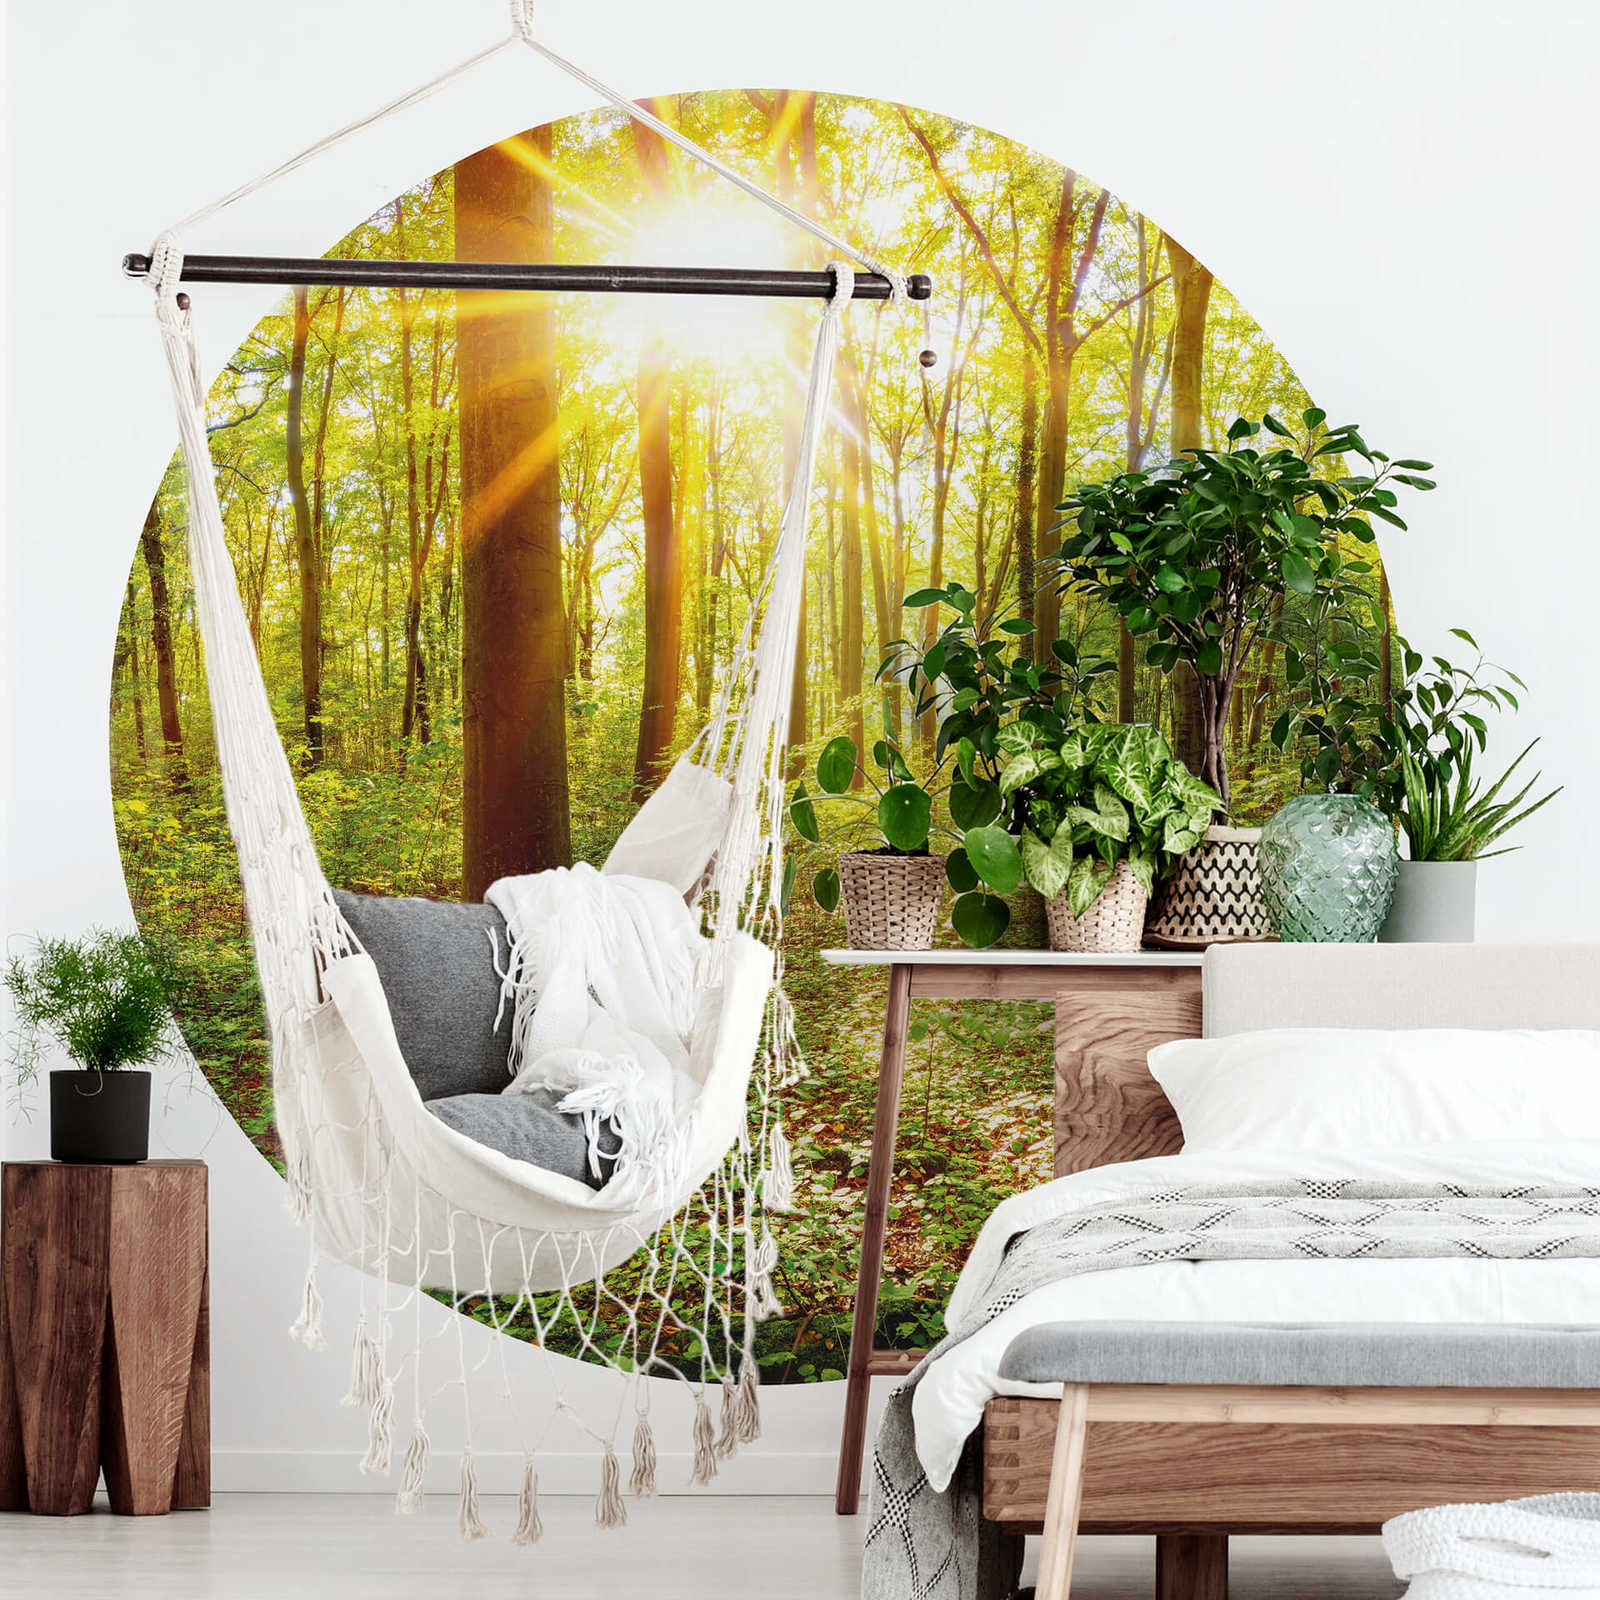             Photo wallpaper round sunny forest - green, brown
        